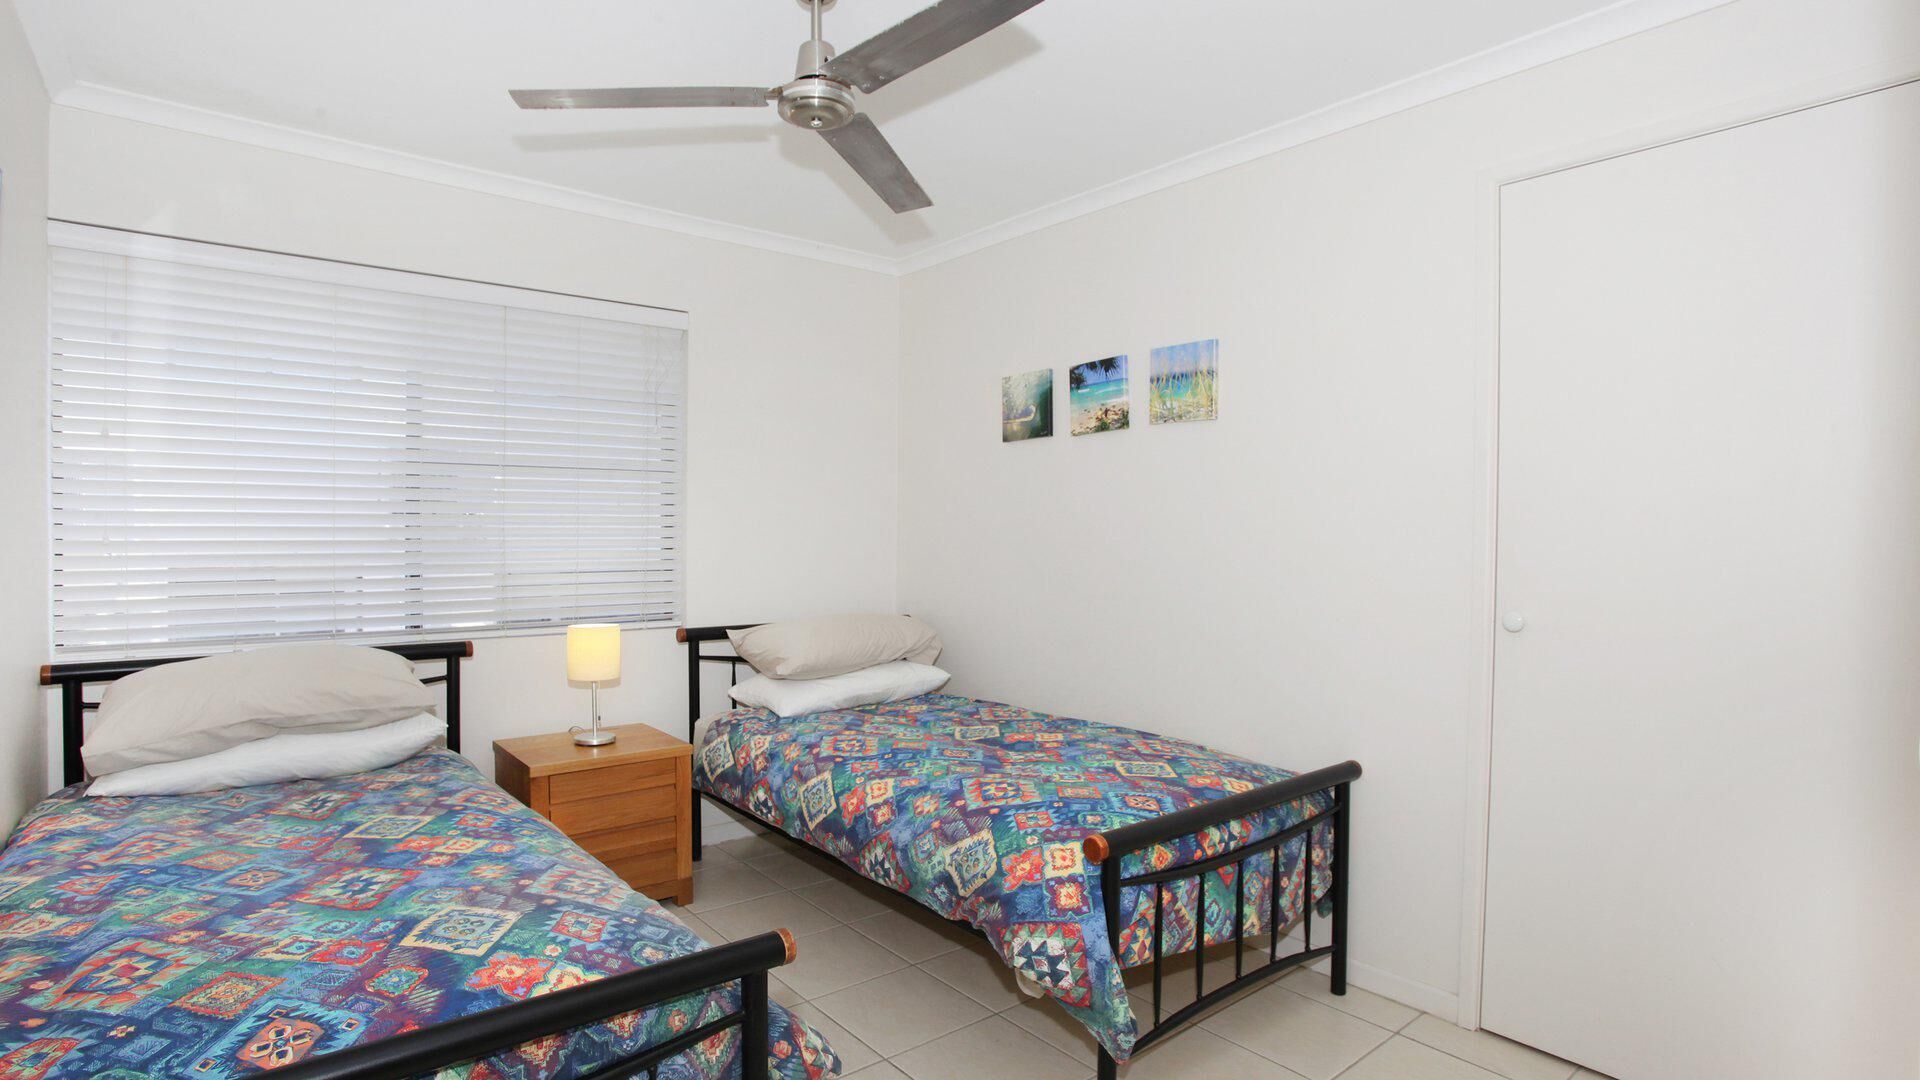 2 Bedroom Apartment in the heart of Mooloolaba